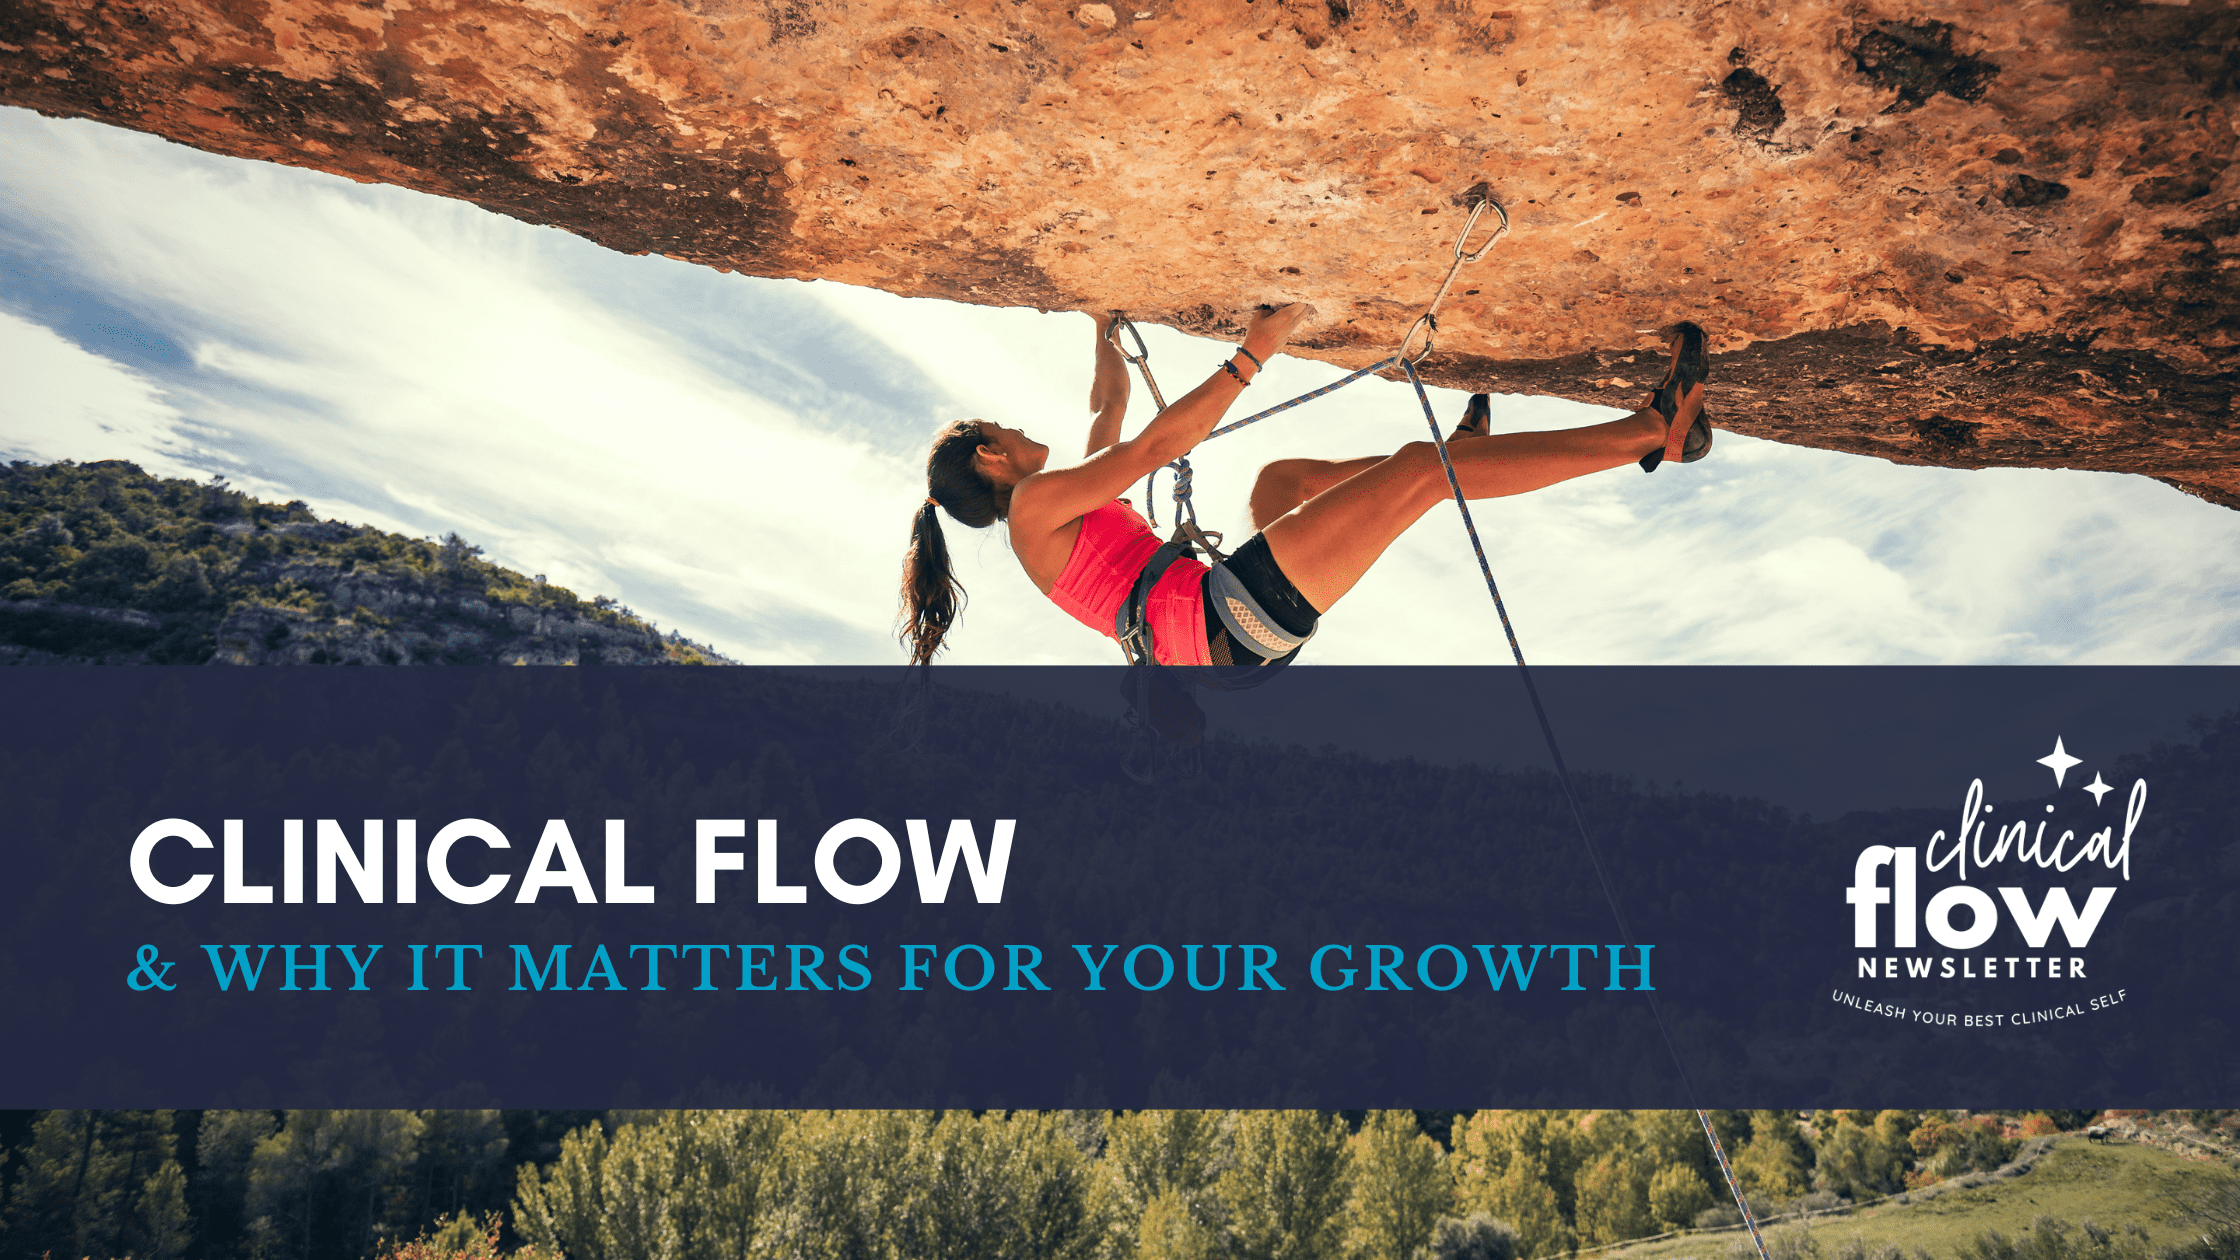 Clinical flow and why it matters for your growth